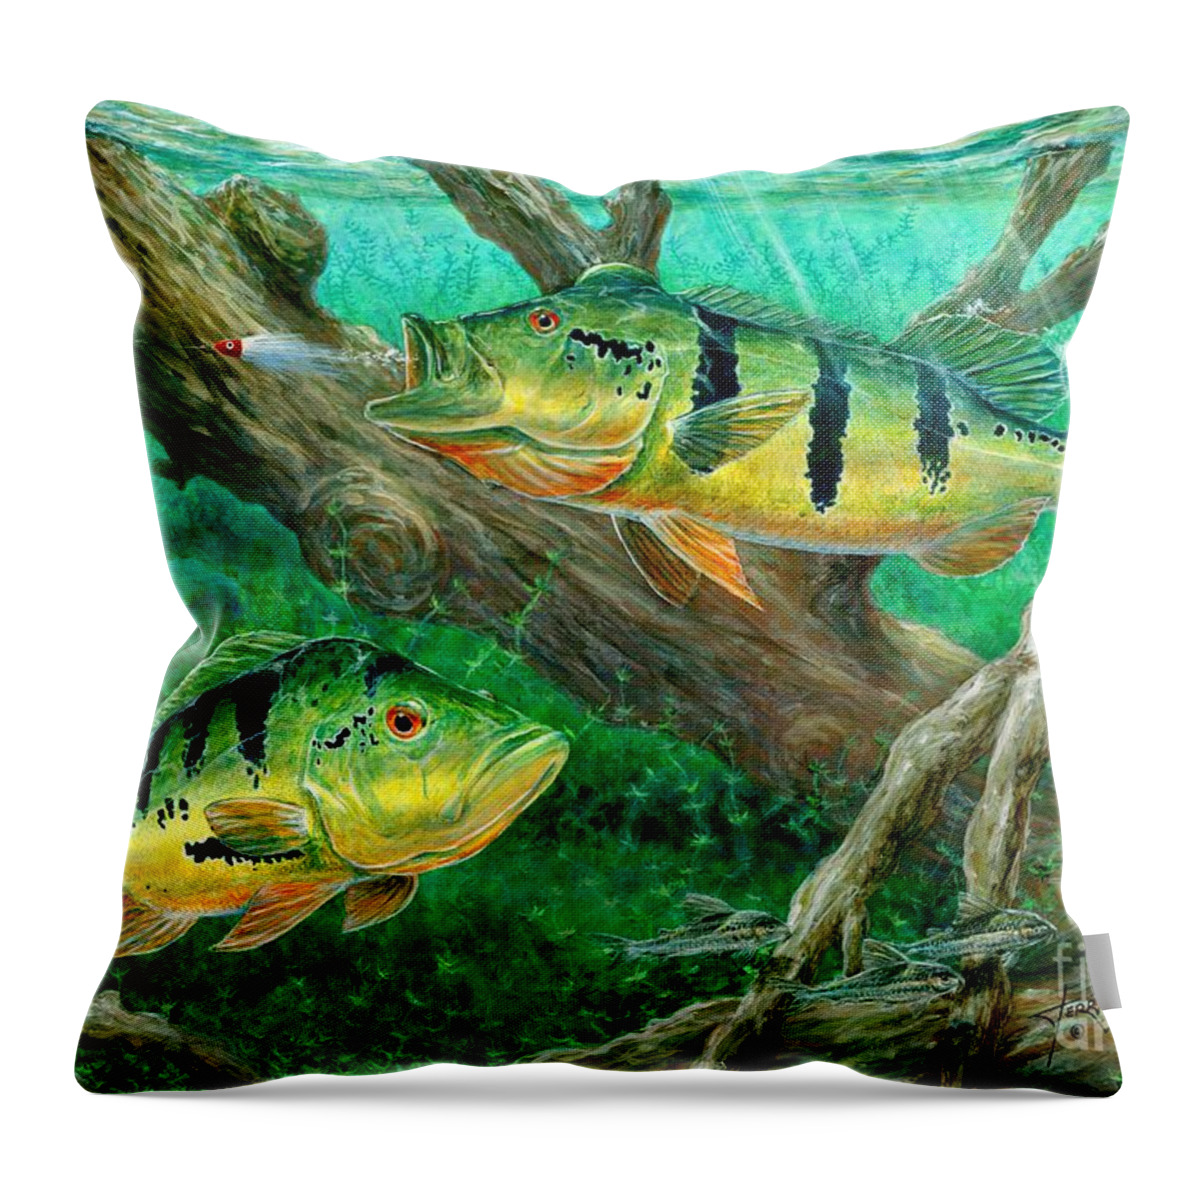 Peacock Bass Throw Pillow featuring the painting Catching Peacock Bass - Pavon by Terry Fox